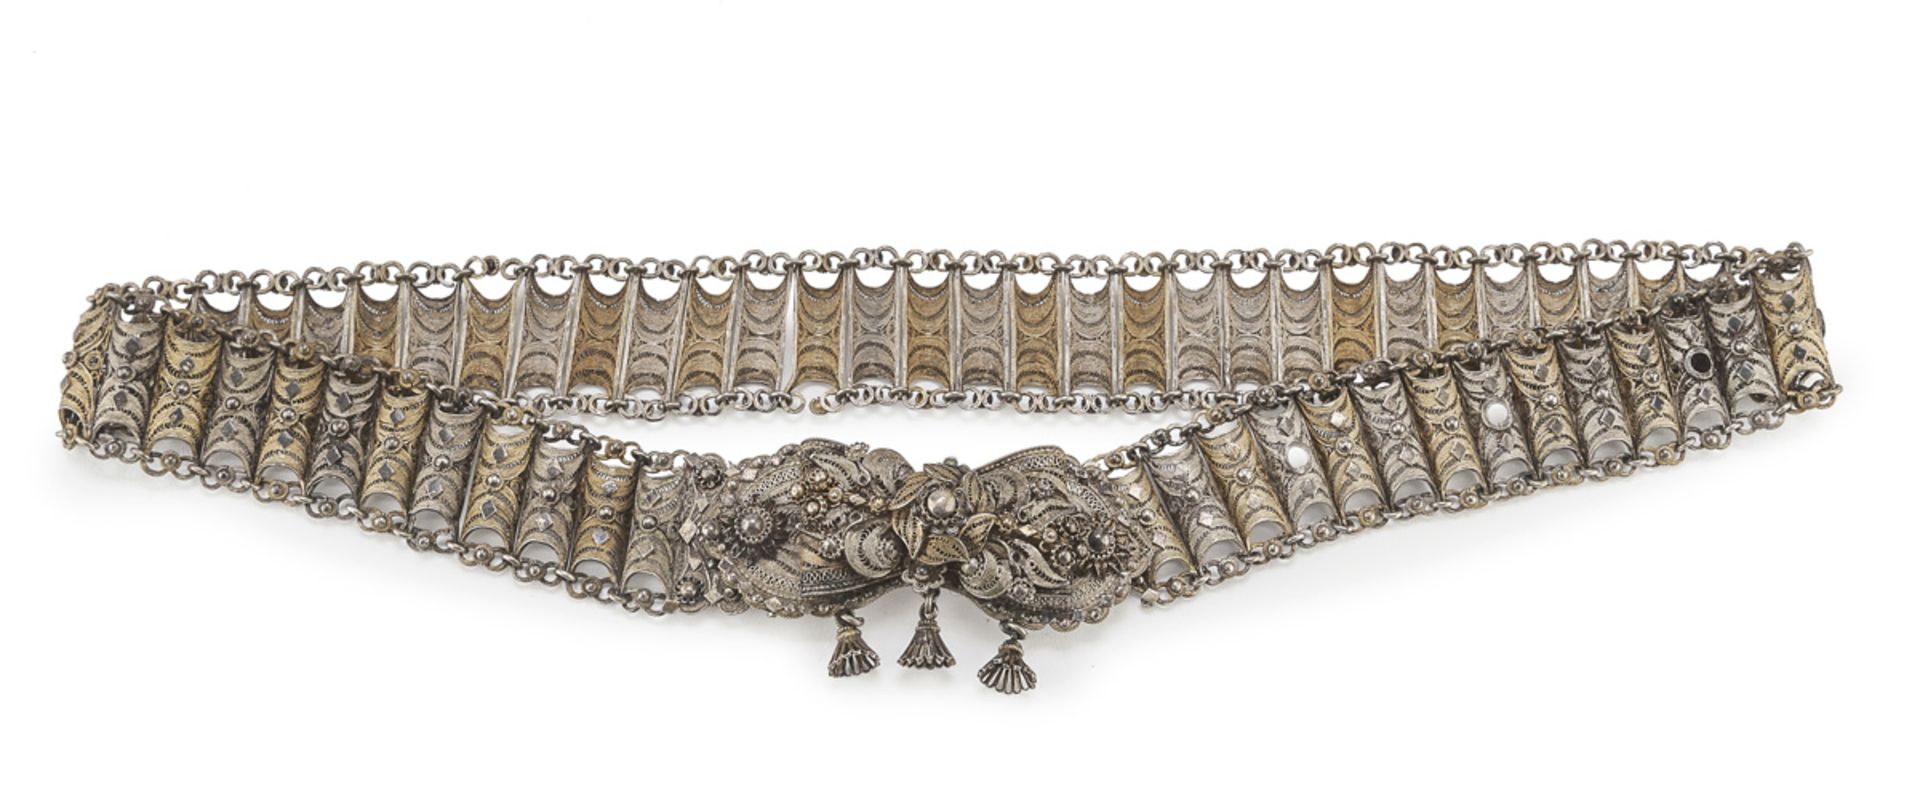 BELT IN SILVER - LATE 19TH CENTURY